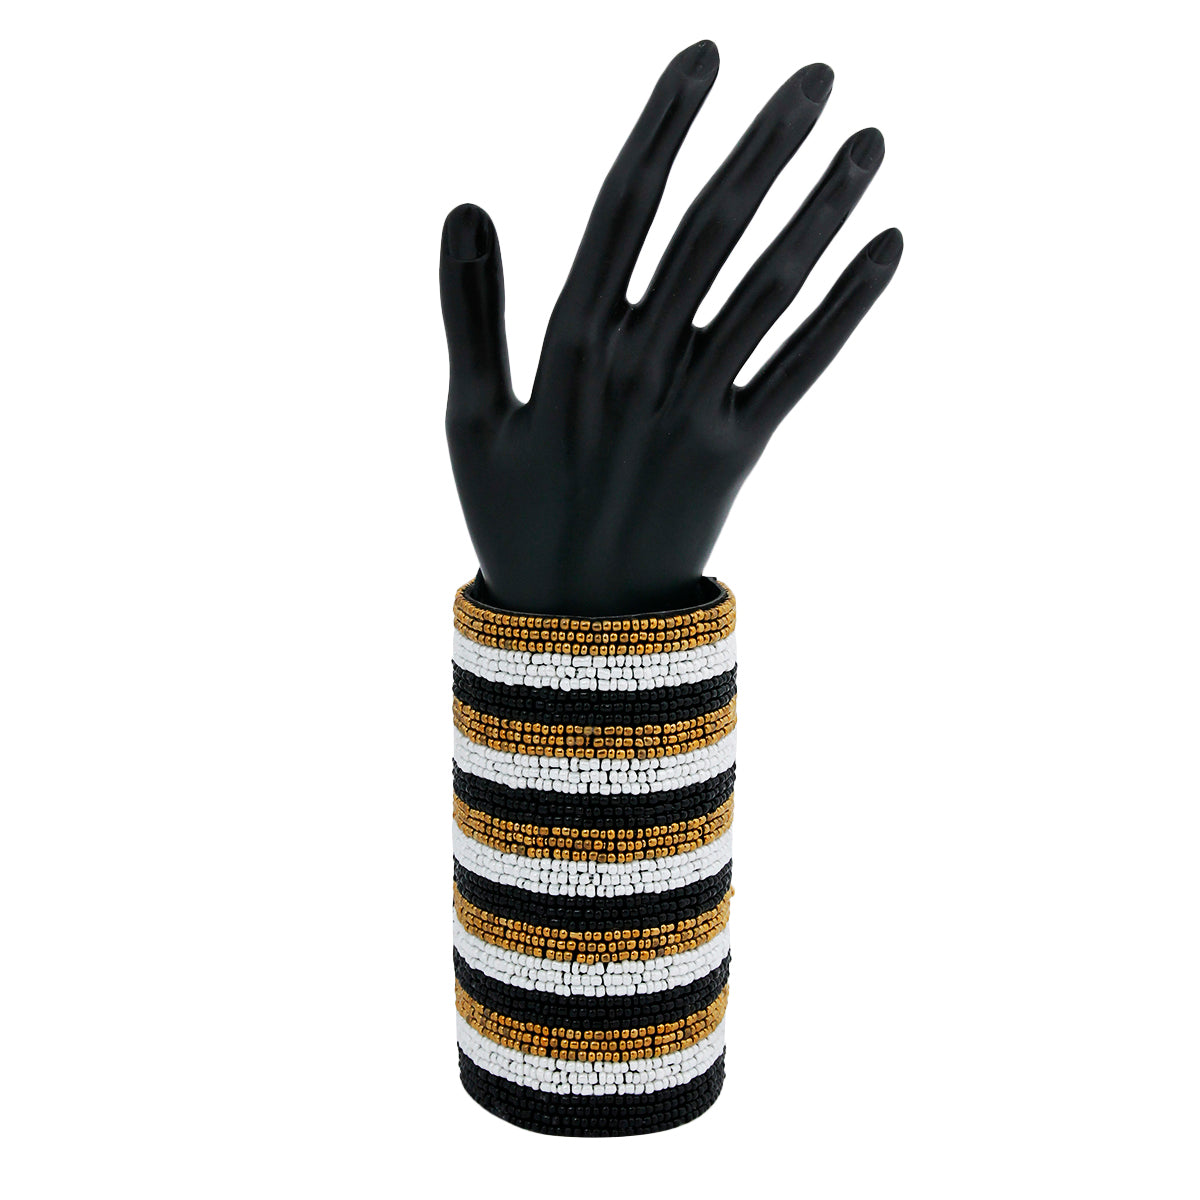 Black, White, and Gold Bead Striped Embroidered Arm Cuff Bracelet